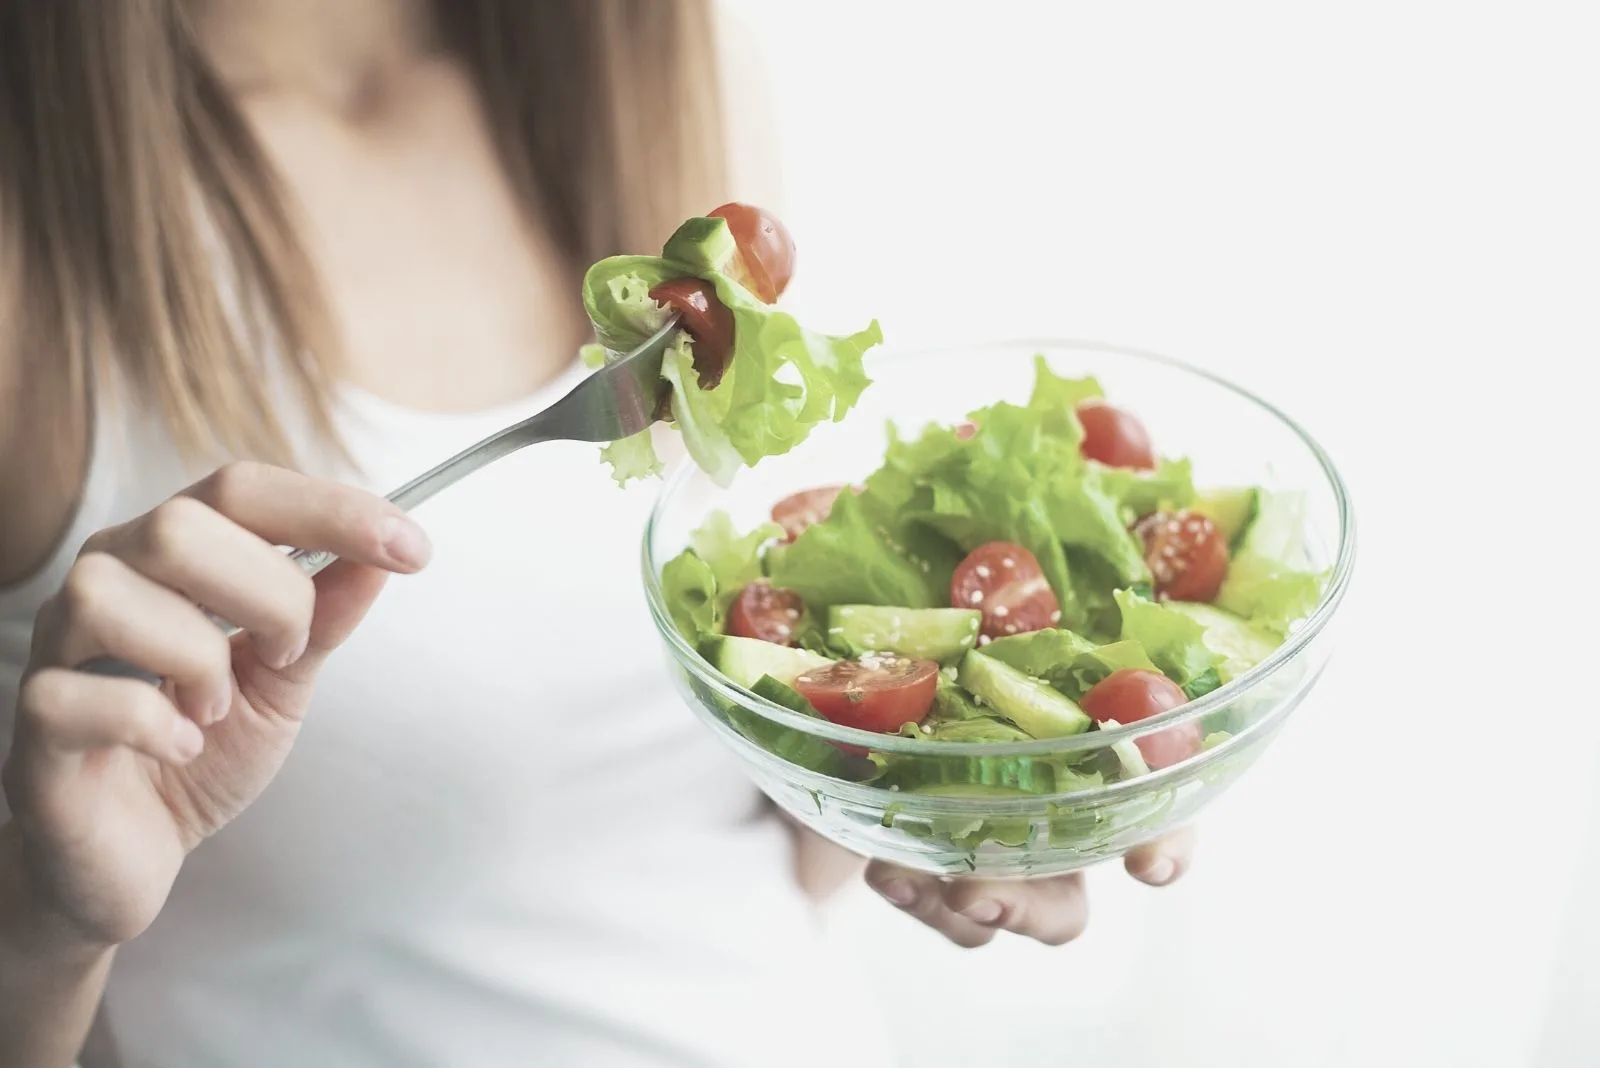 woman eating healthy salad in cropped image